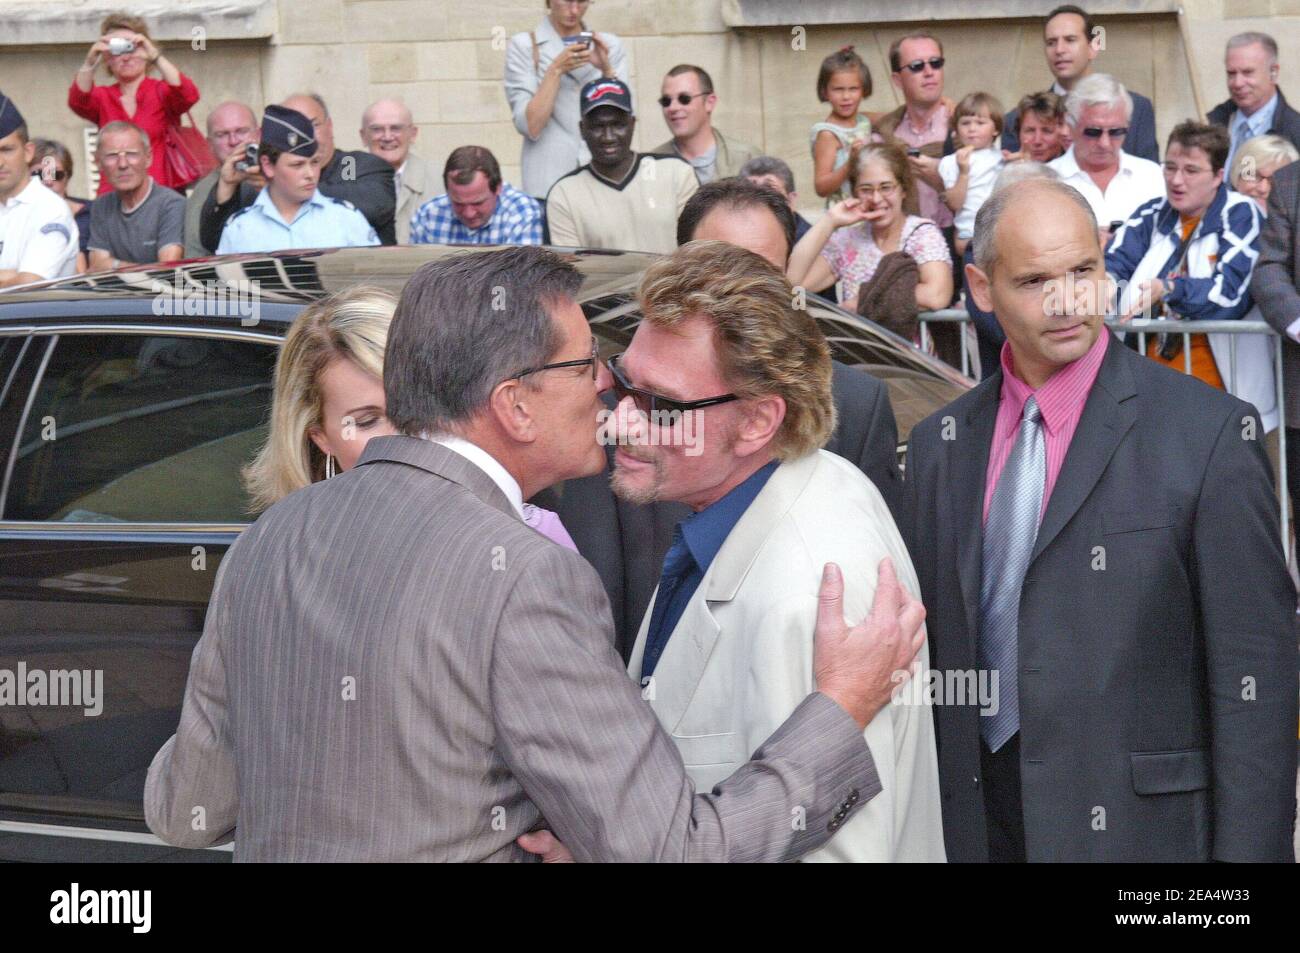 French producer Jean-Claude Camus and French singer Johnny Hallyday attend  French actress Mimie Mathy and Benoist Gerard's wedding at the city hall of  Neuilly-sur-Seine near Paris on August 27, 2005. Photo by